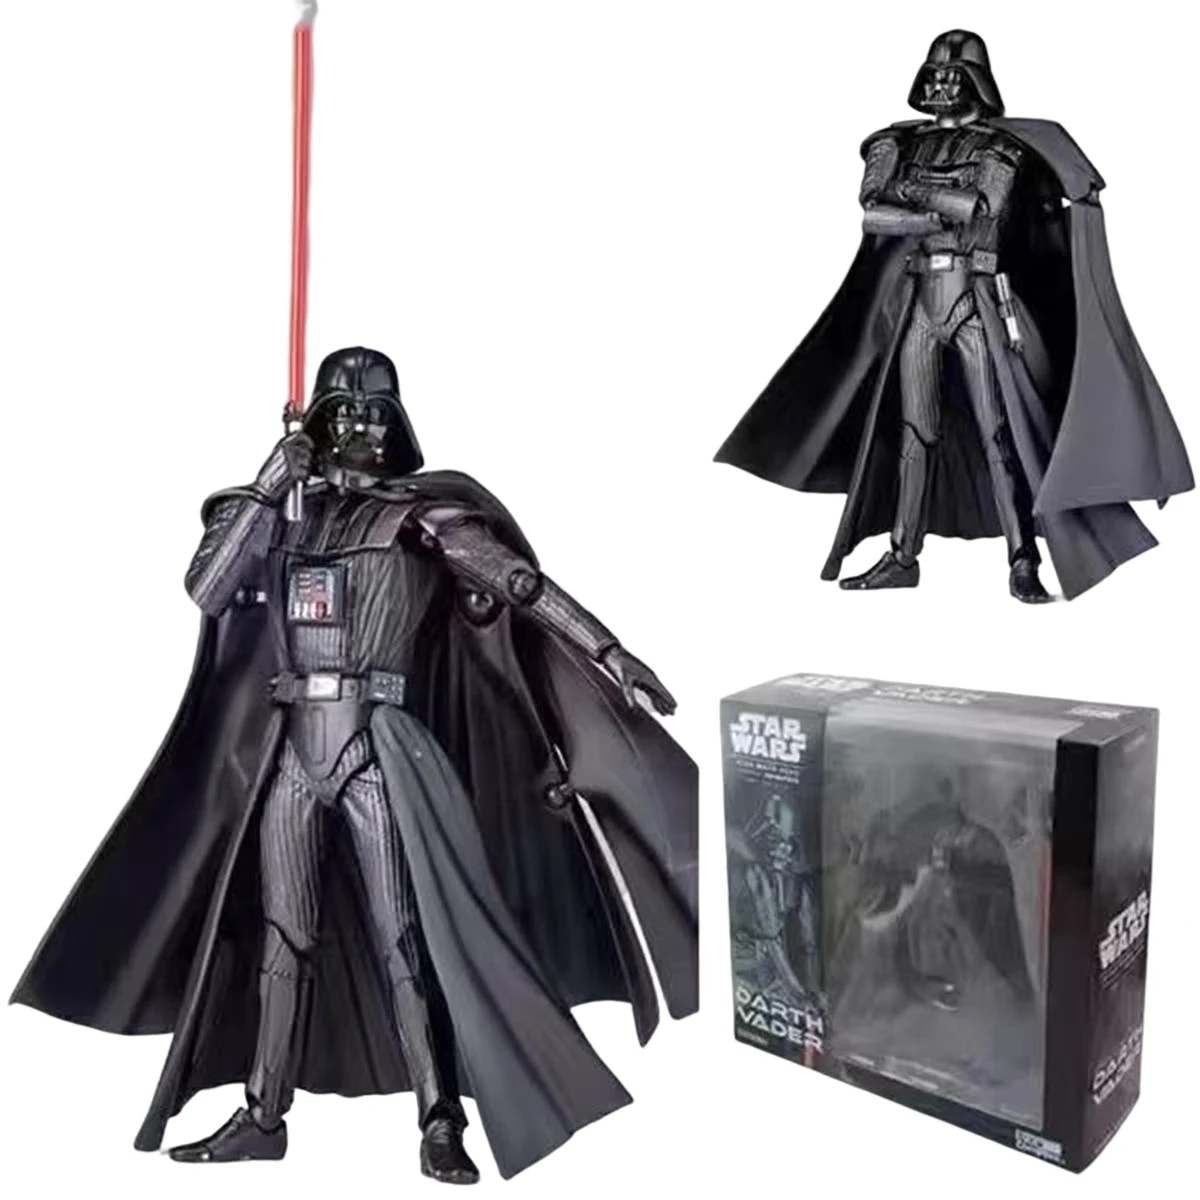 

Star Wars Animation Movies Peripheral Toys Movable Dolls Figure Model Darth Vader Anakin Skywalker The Empire Strikes Back